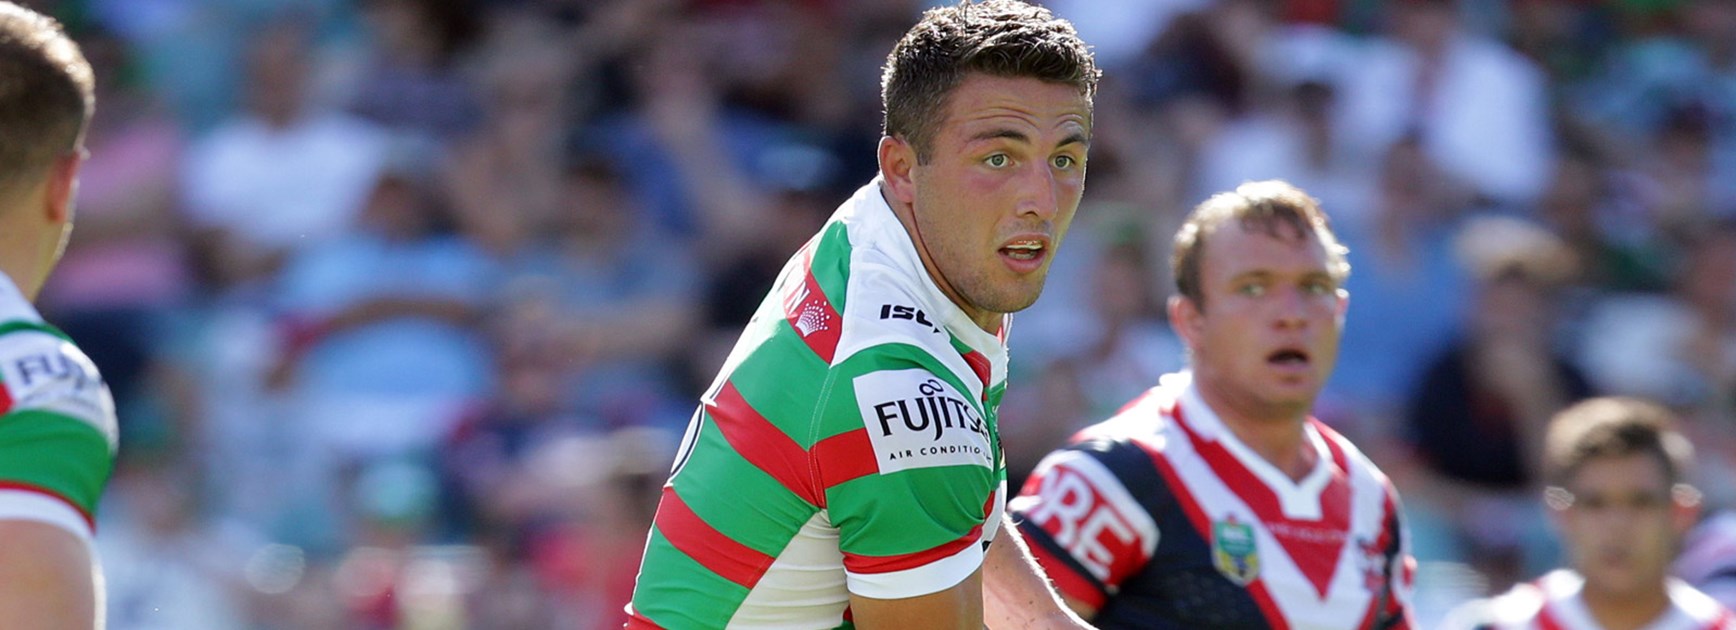 Sam Burgess on his NRL return against the Roosters in Round 1.